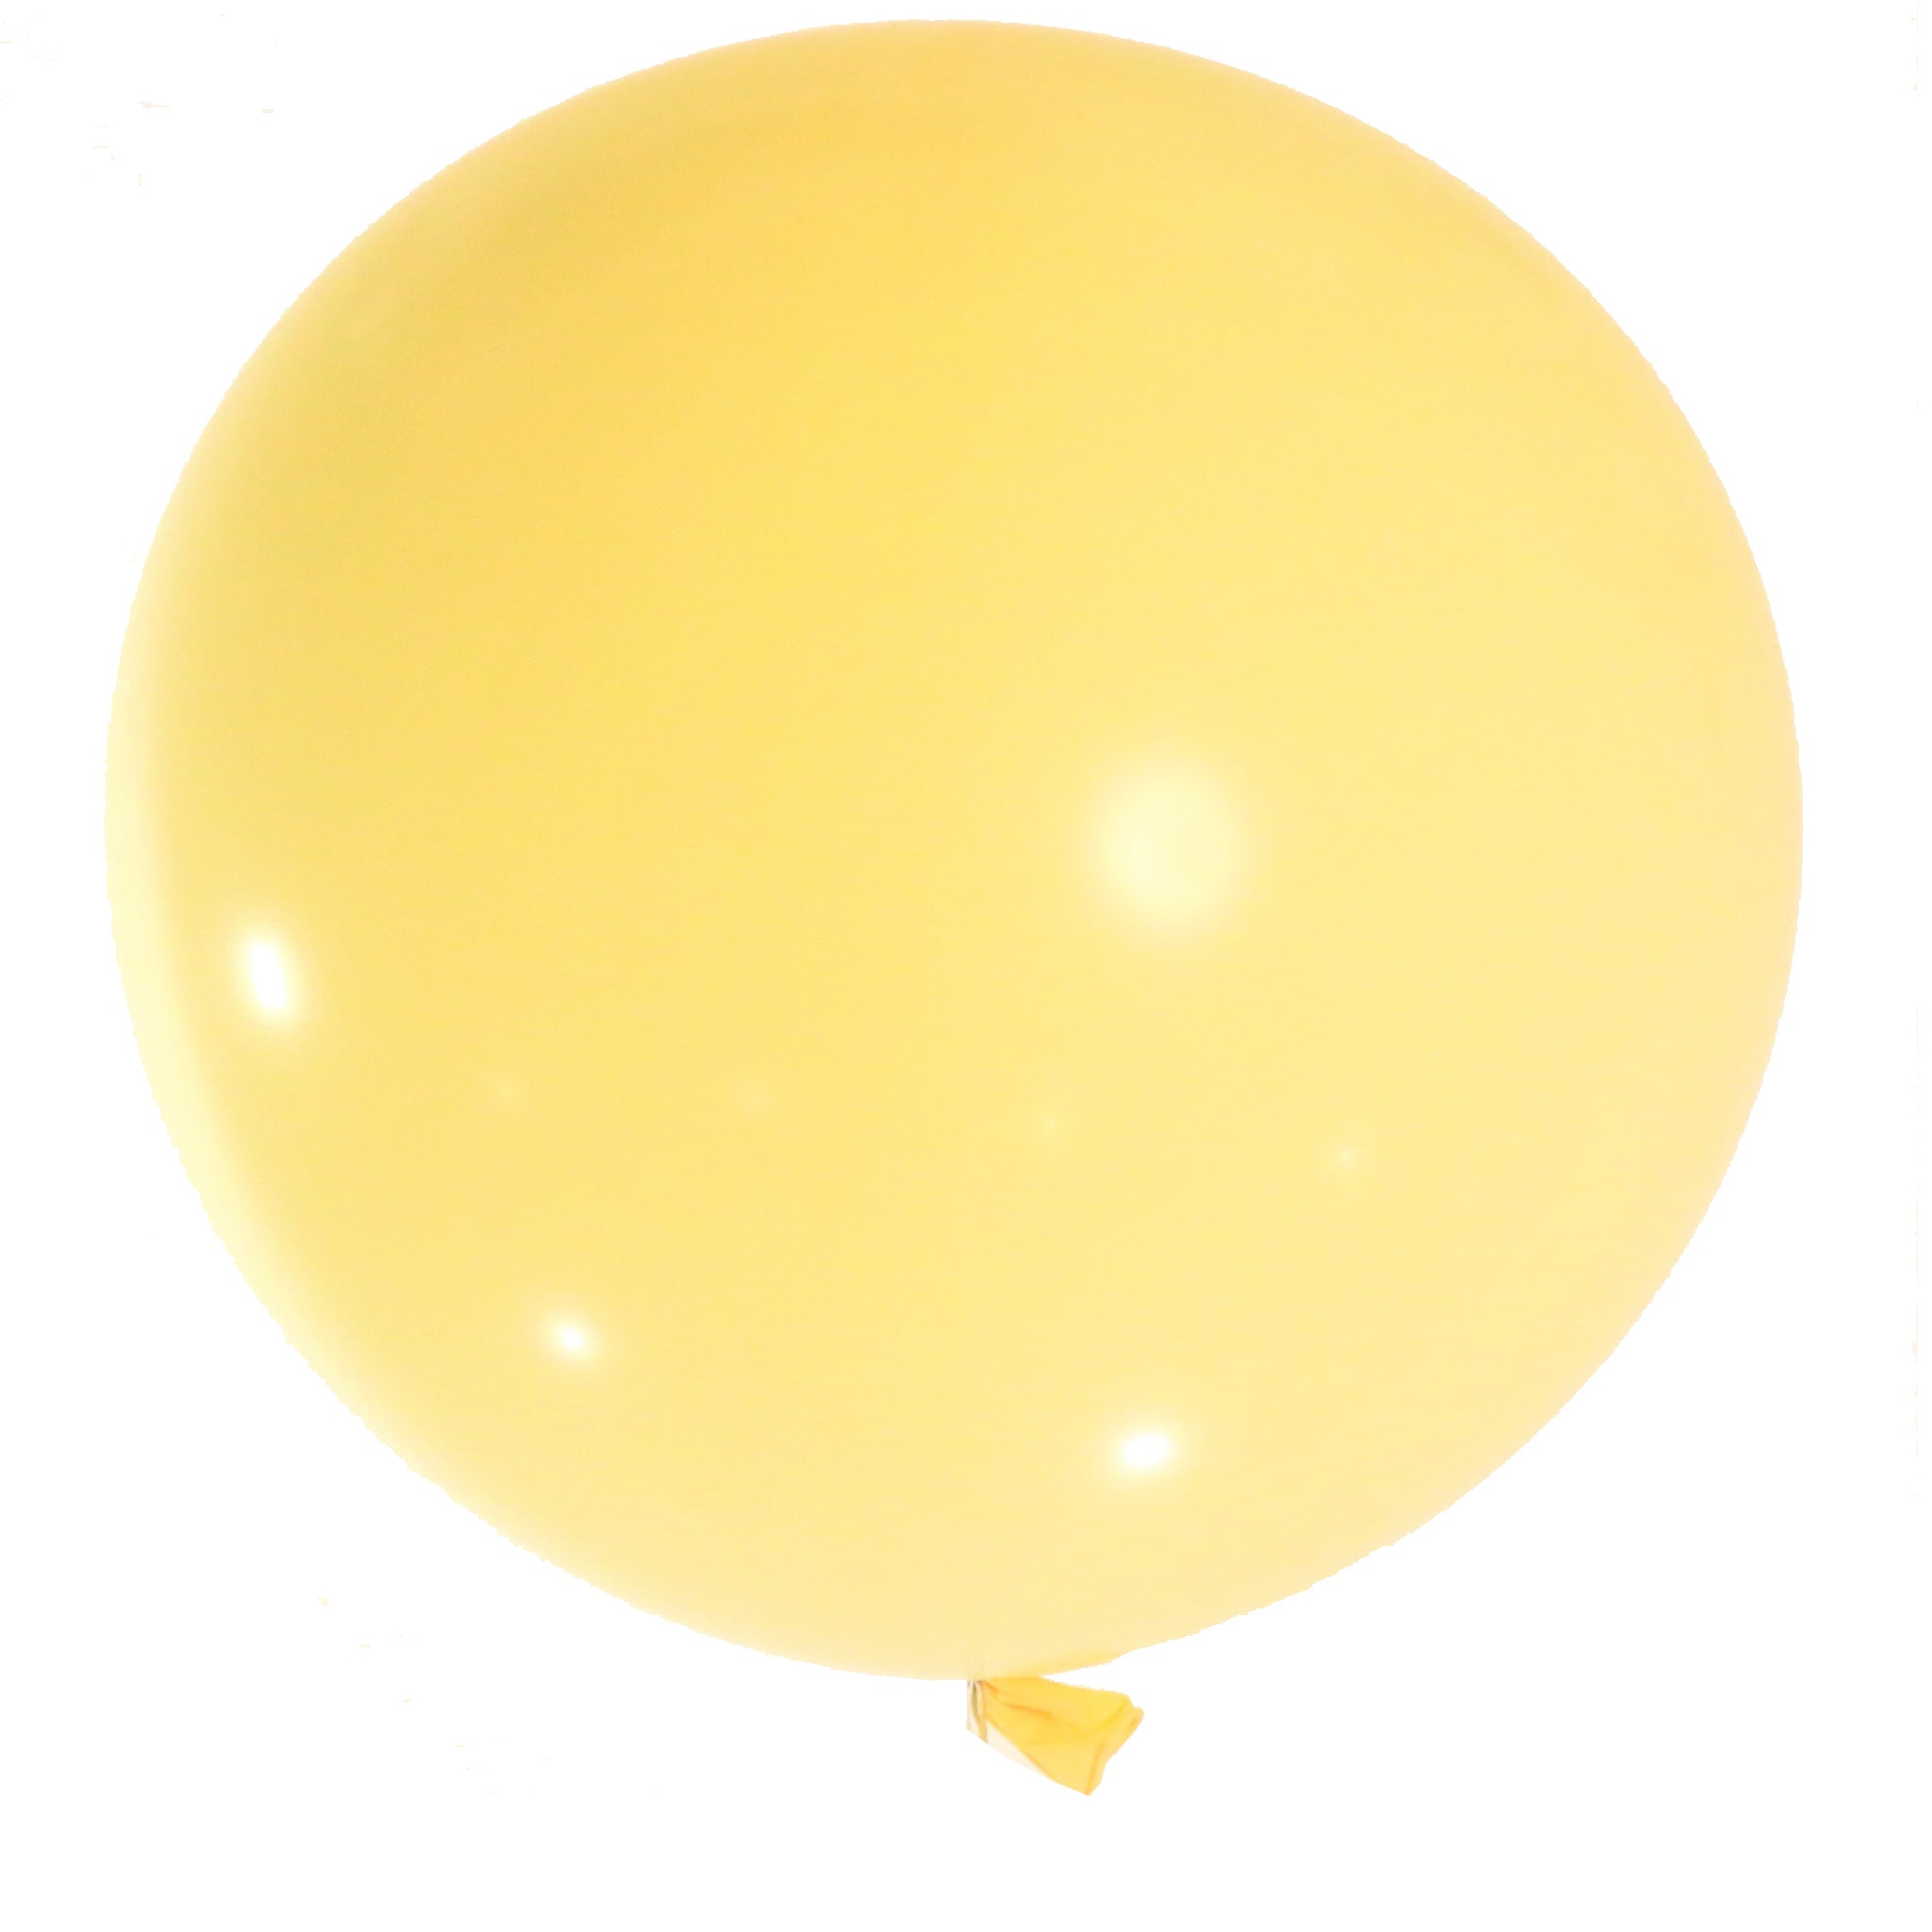 pastel yellow 3 feet latex balloons for sale online in Dubai